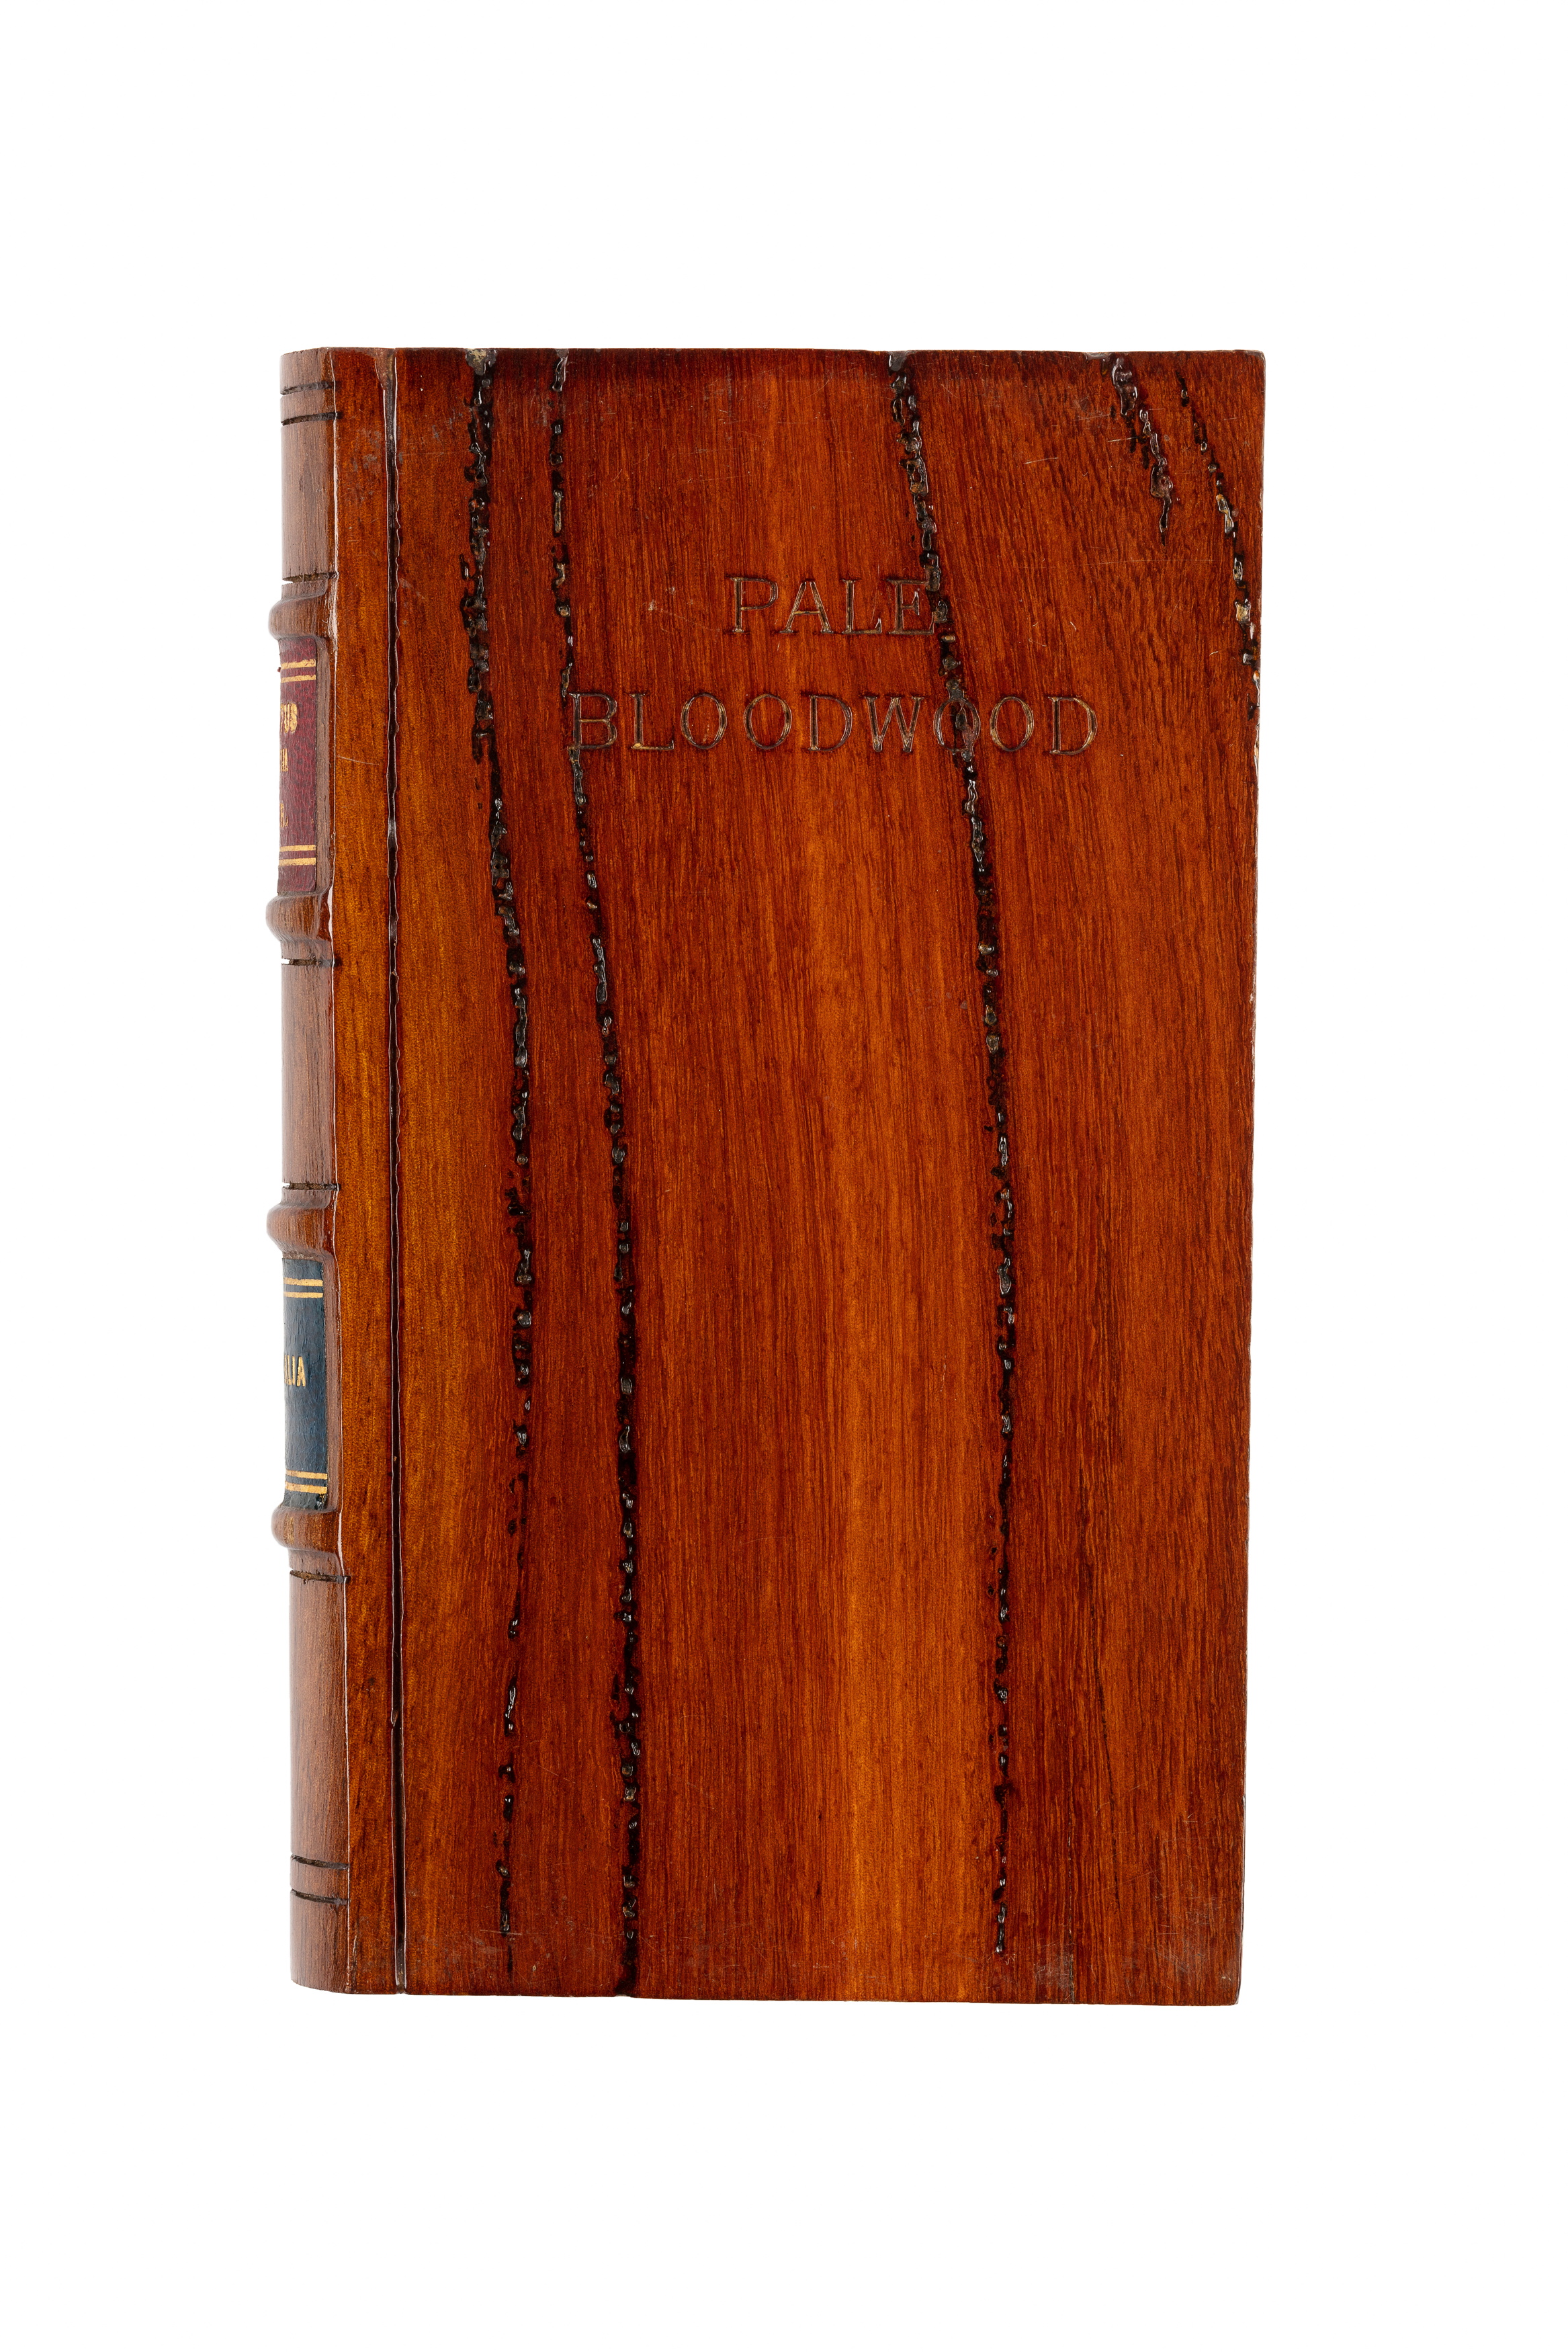 'Eucalyptus intermedia / Pale Bloodwood' timber sample in the form of a book